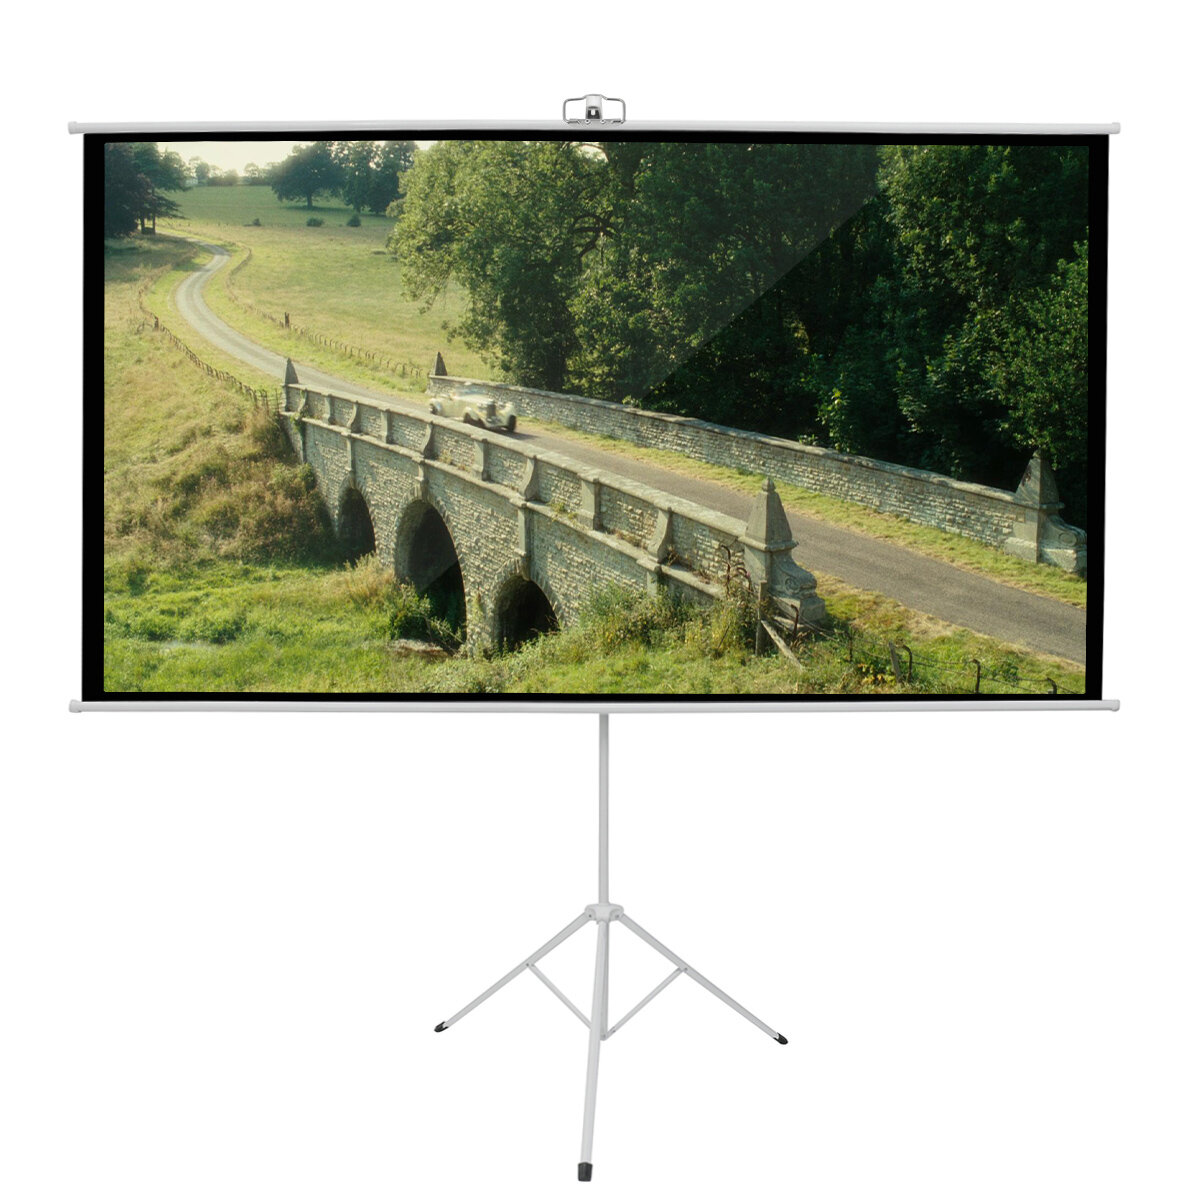 100-inch 16:9/4:3 Projector Screen with Tripod Stand Glass Fiber HD Projection Screen for Home Office Theater Movies Ind